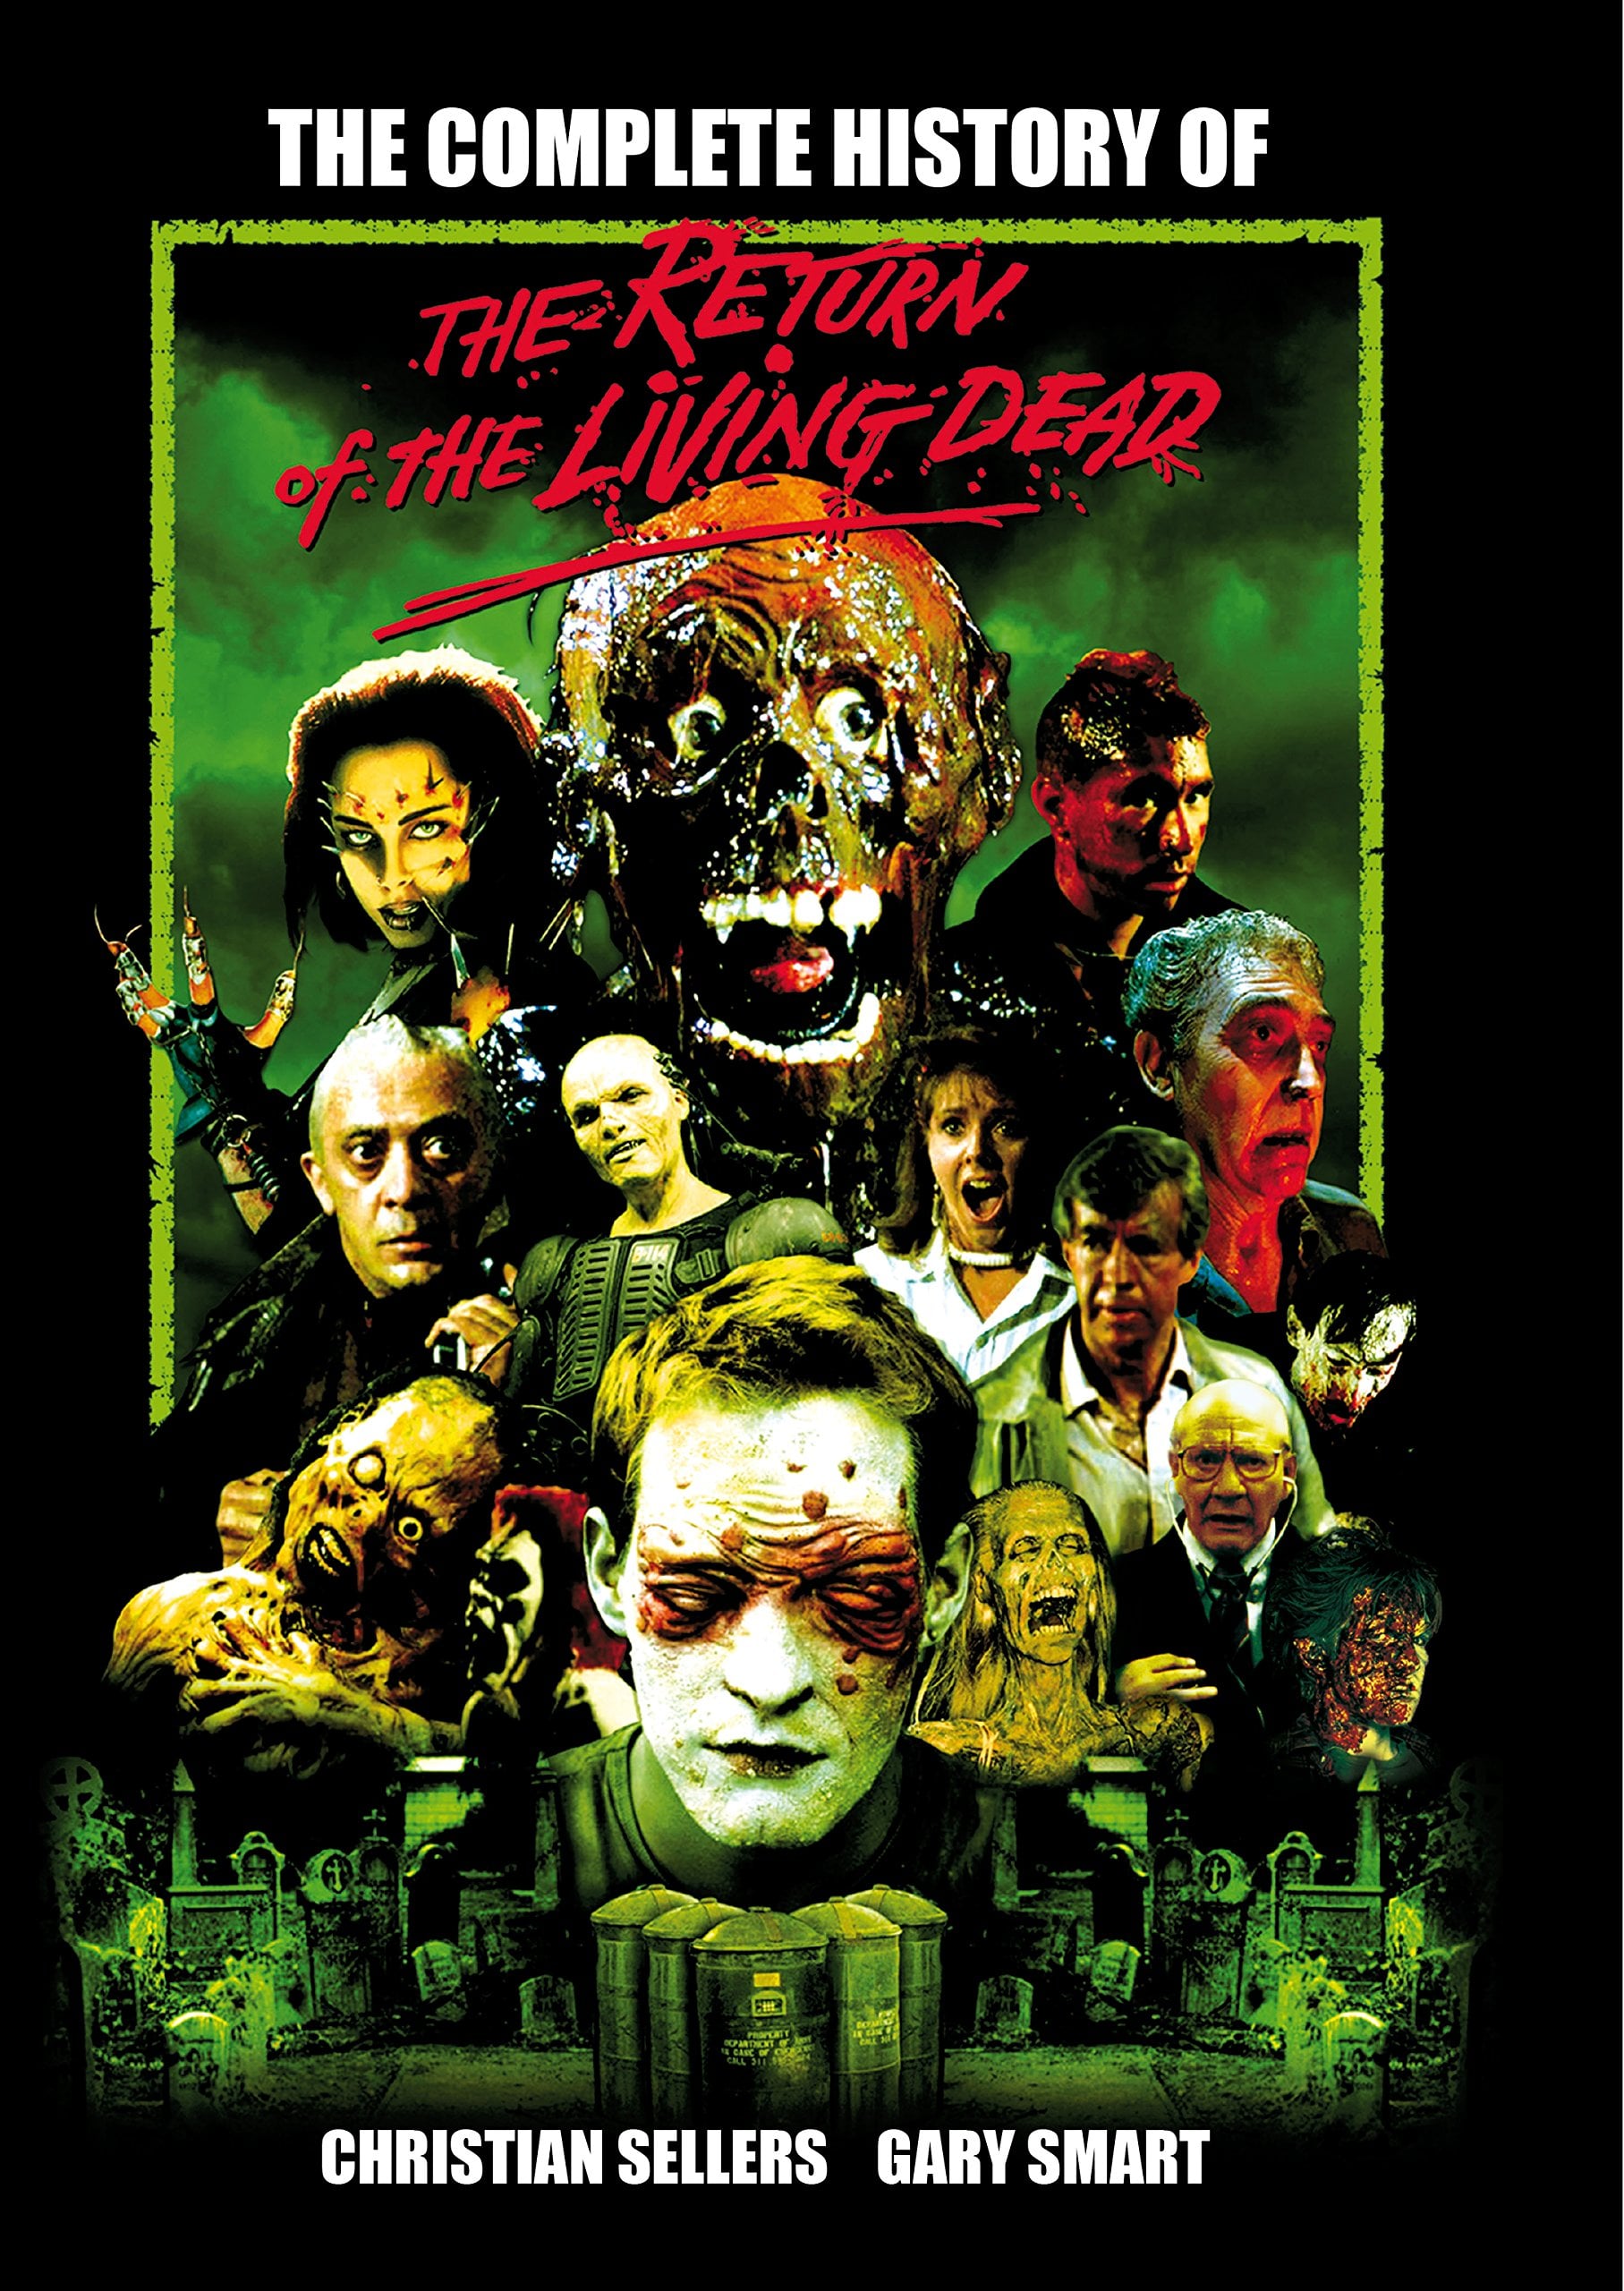 The Complete History of The Return of the Living Dead book cover